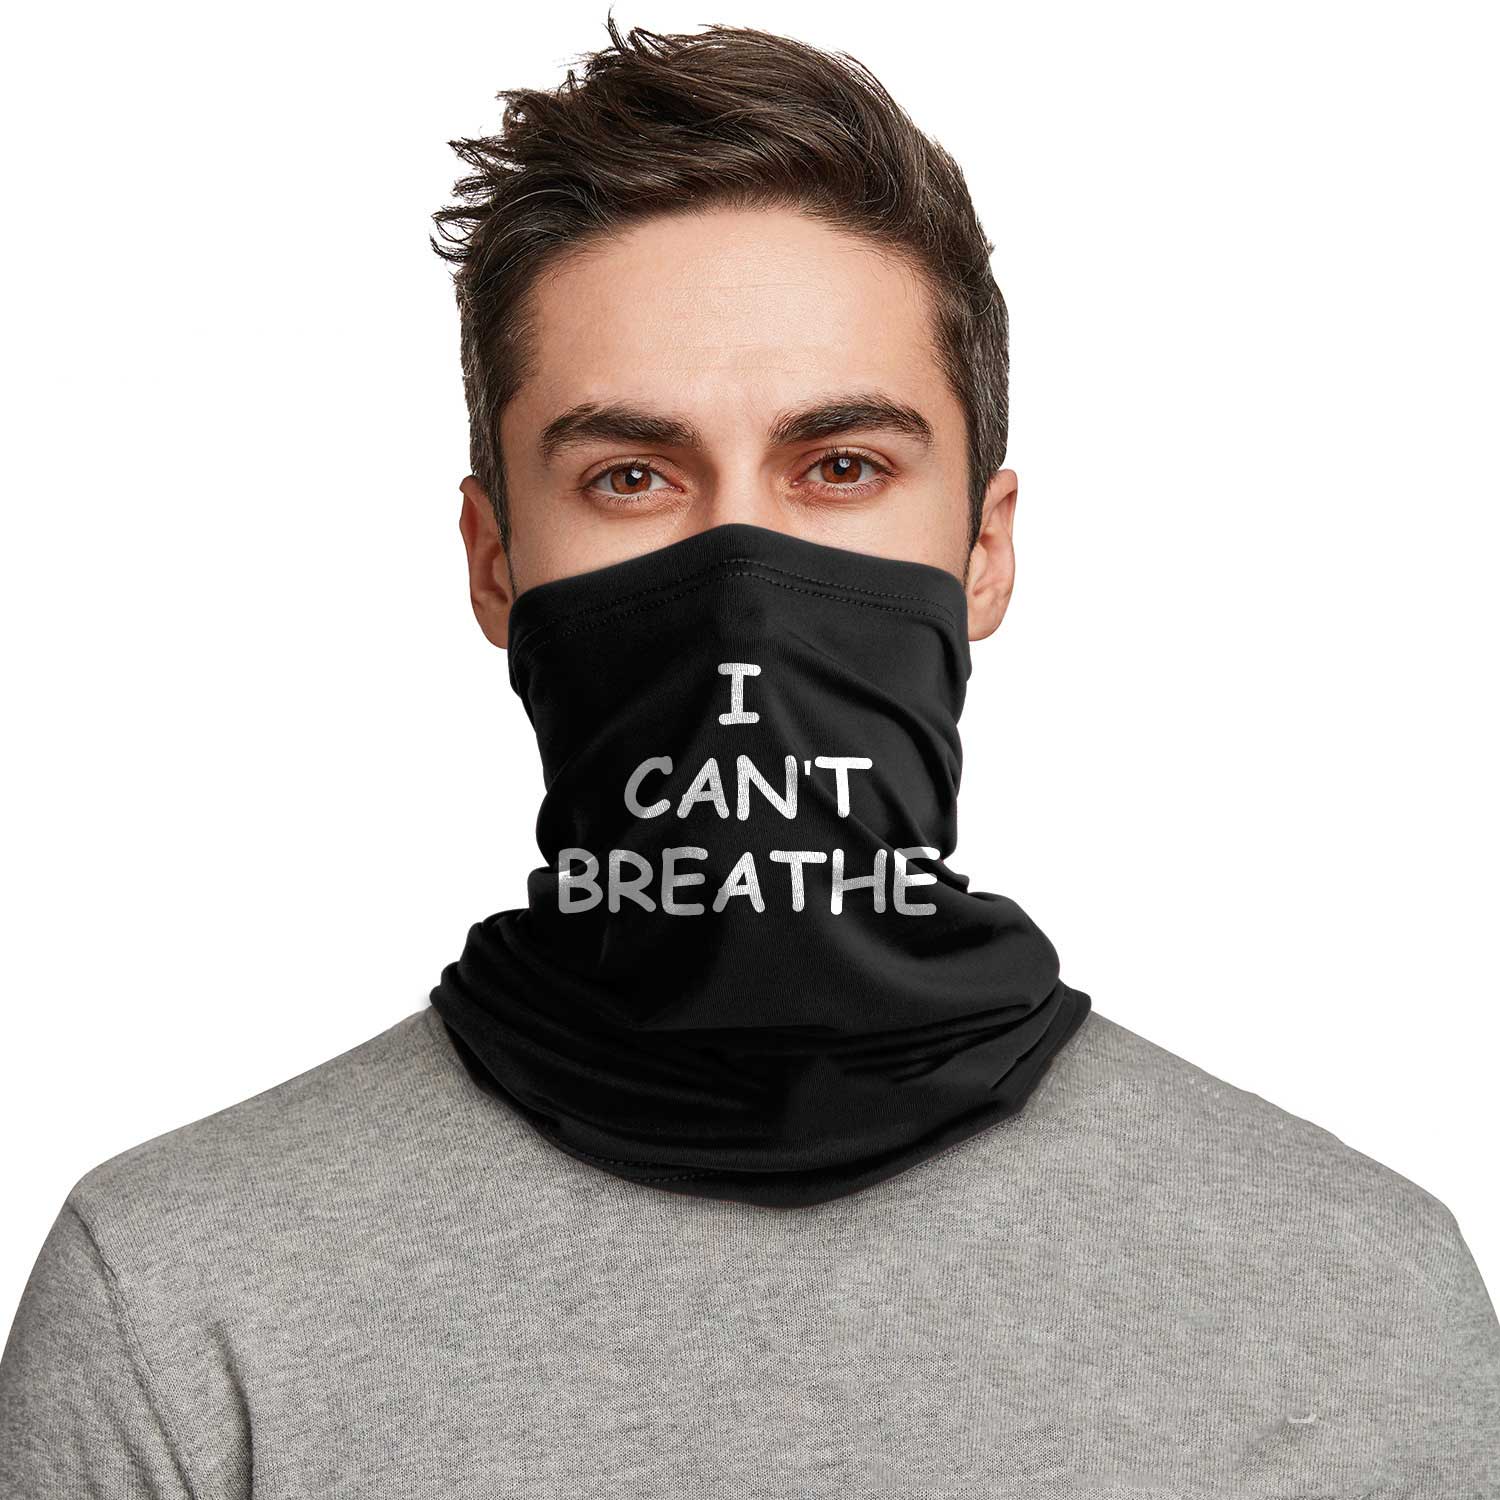 I Can't Breathe Outdoor Mouth Mask Neck Warmer